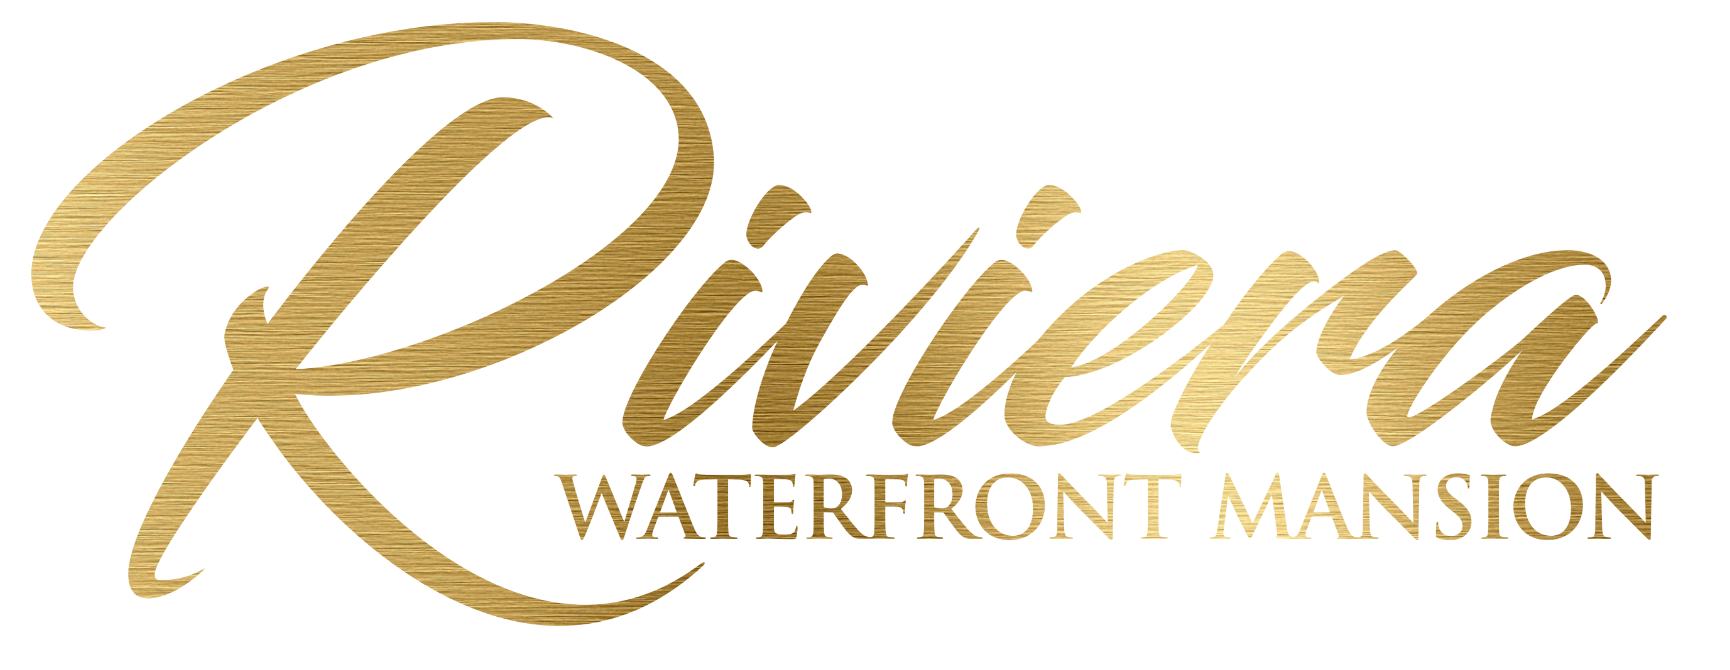 A gold logo for riviera waterfront mansion on a white background.